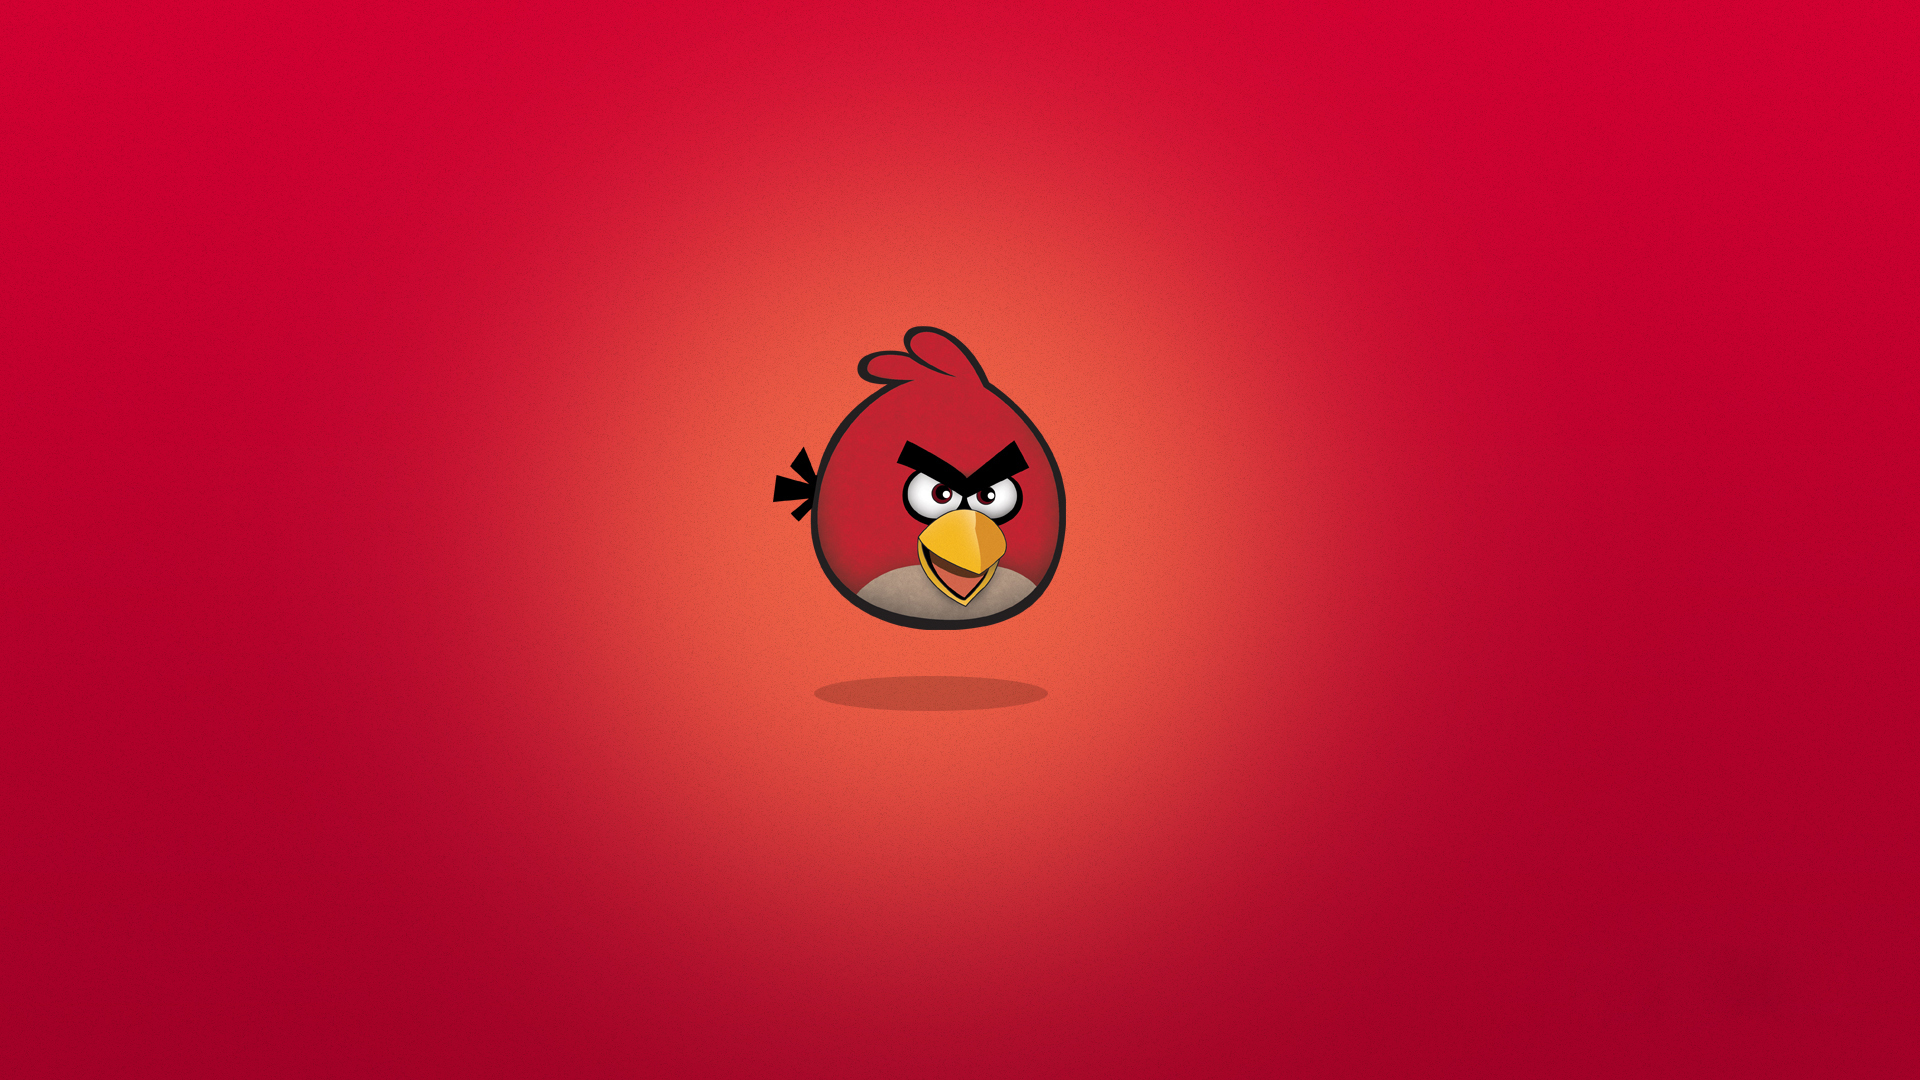 Angry Birds Wallpapers Desktop Wallpapers Angry Birds Wallpaper 7 1920x1080